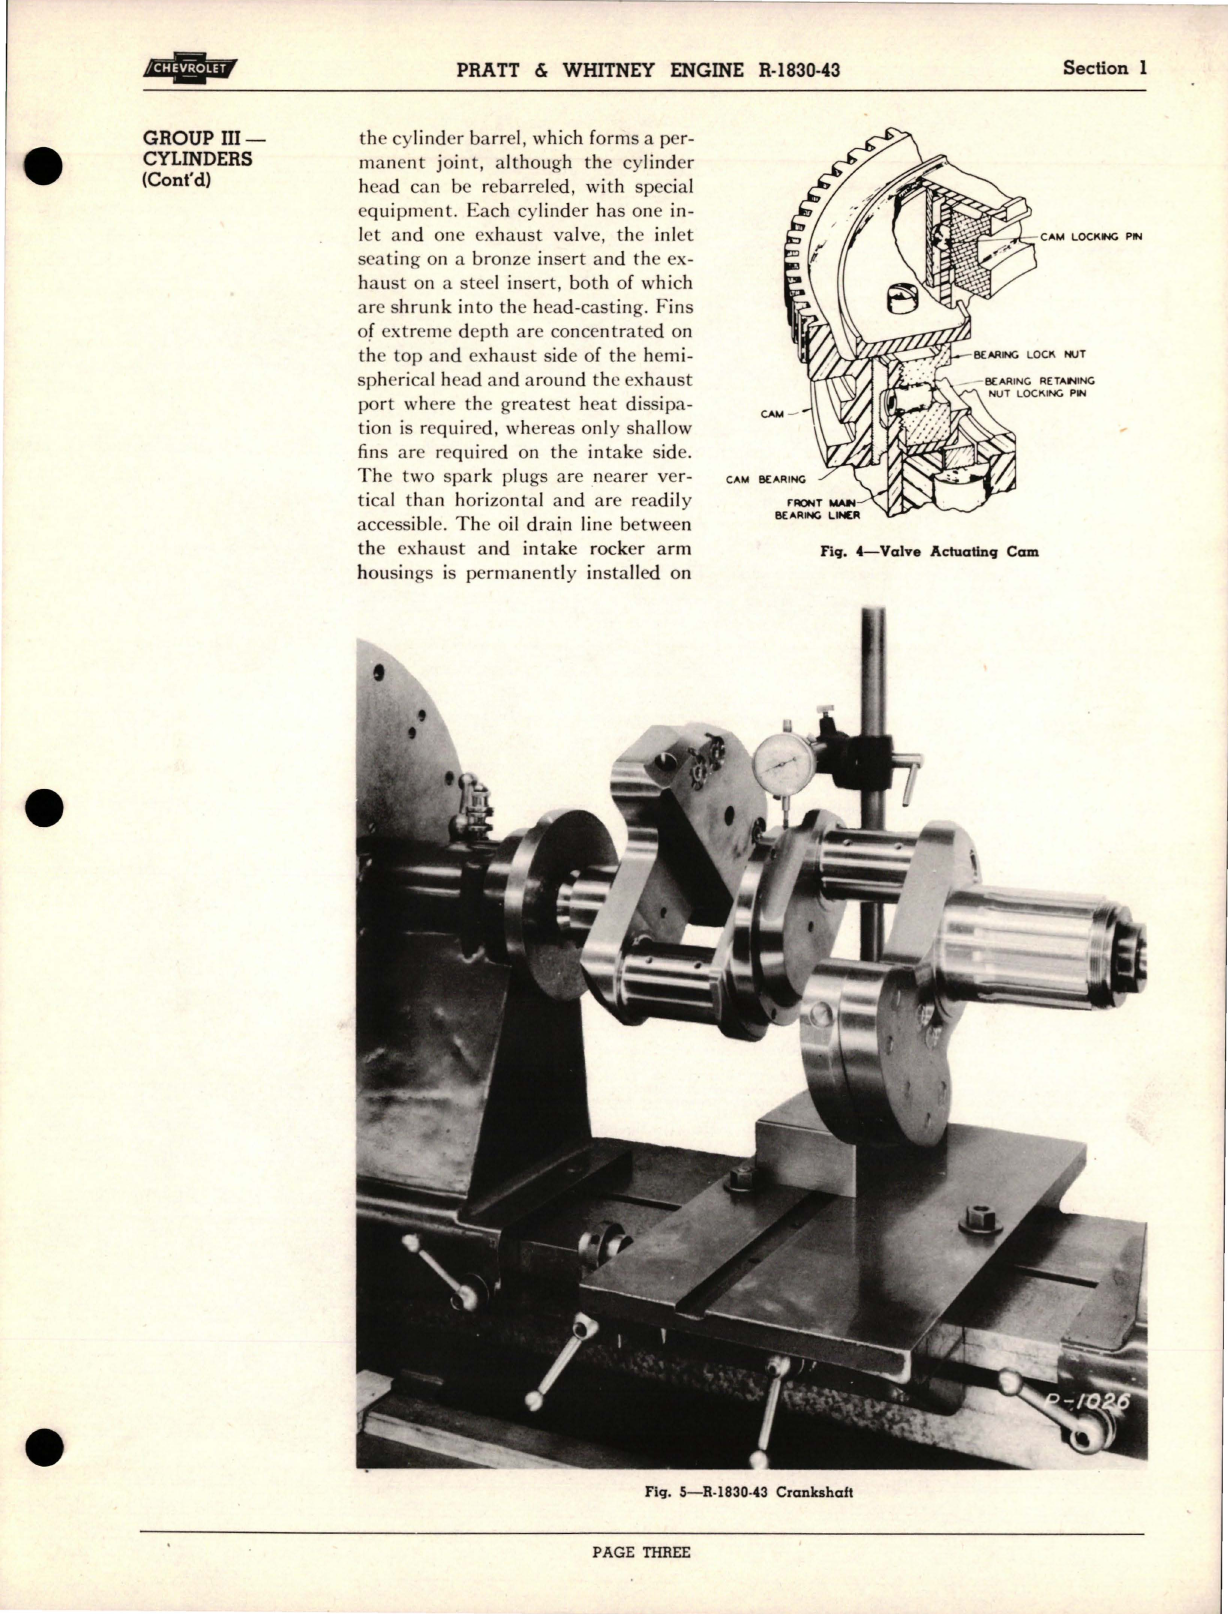 Sample page 8 from AirCorps Library document: Training Manual for Pratt & Whitney Model R-1830-43 Engine